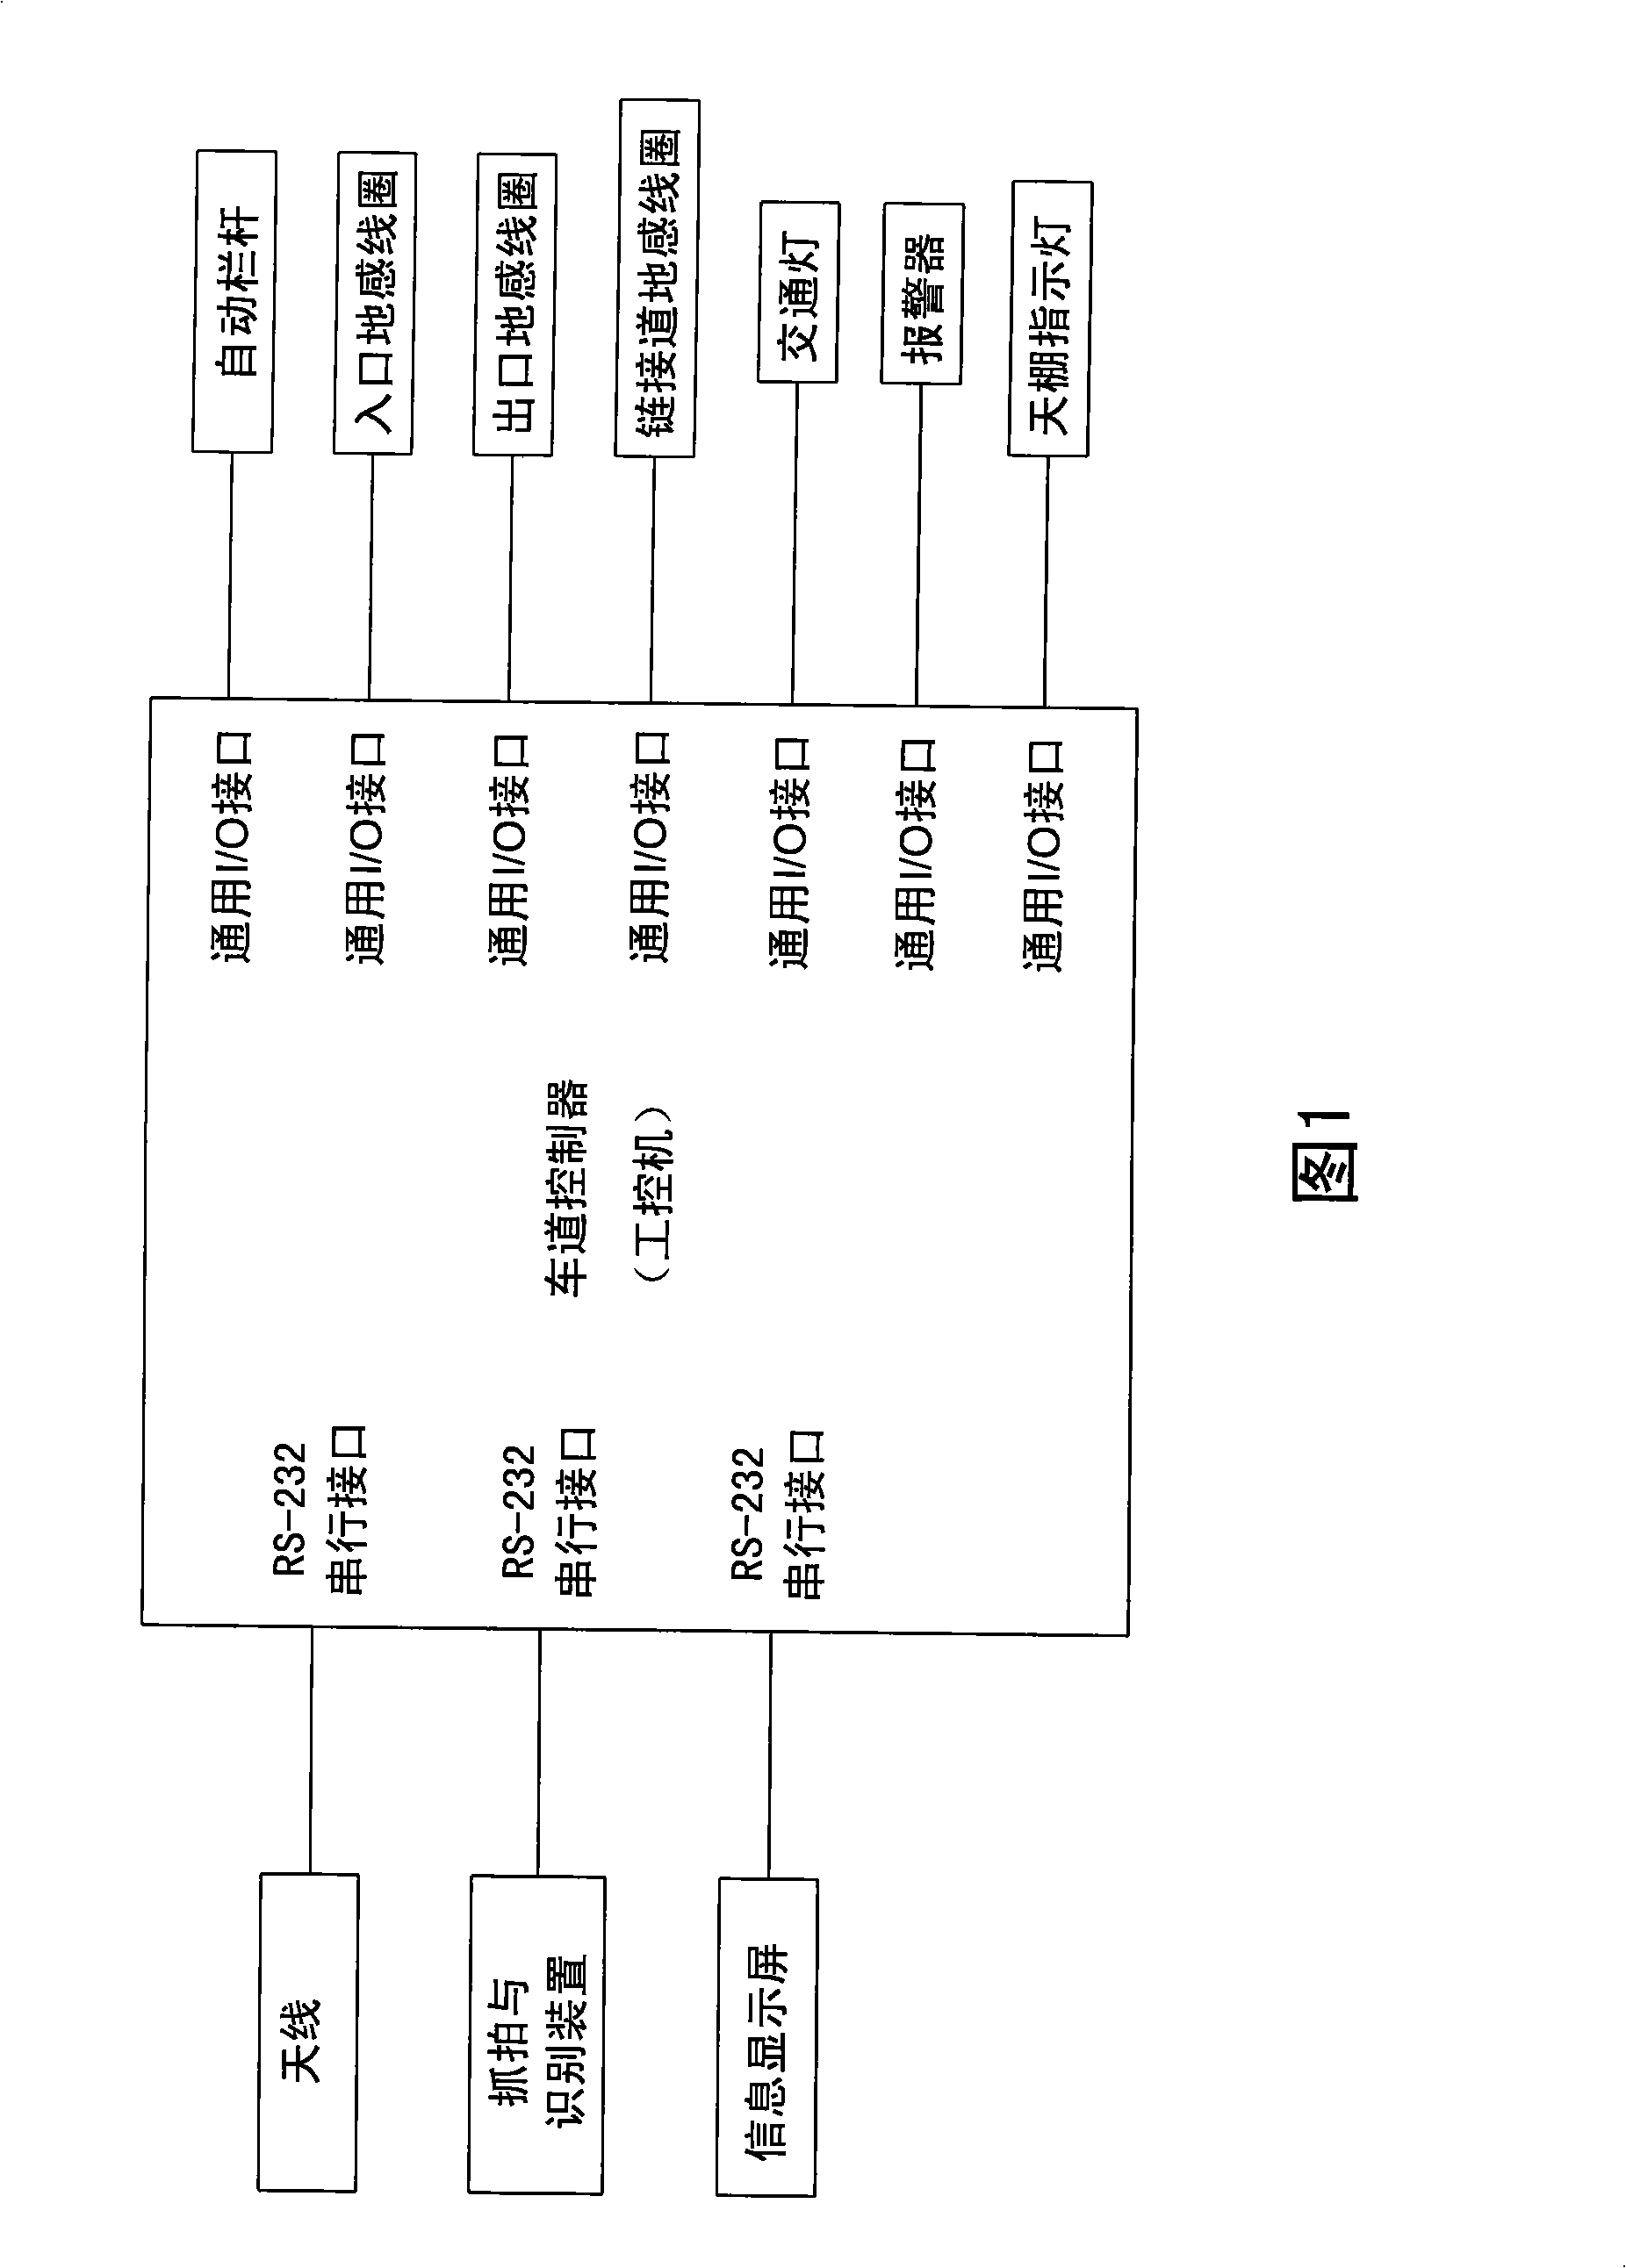 Control method for electronic charging system without parking